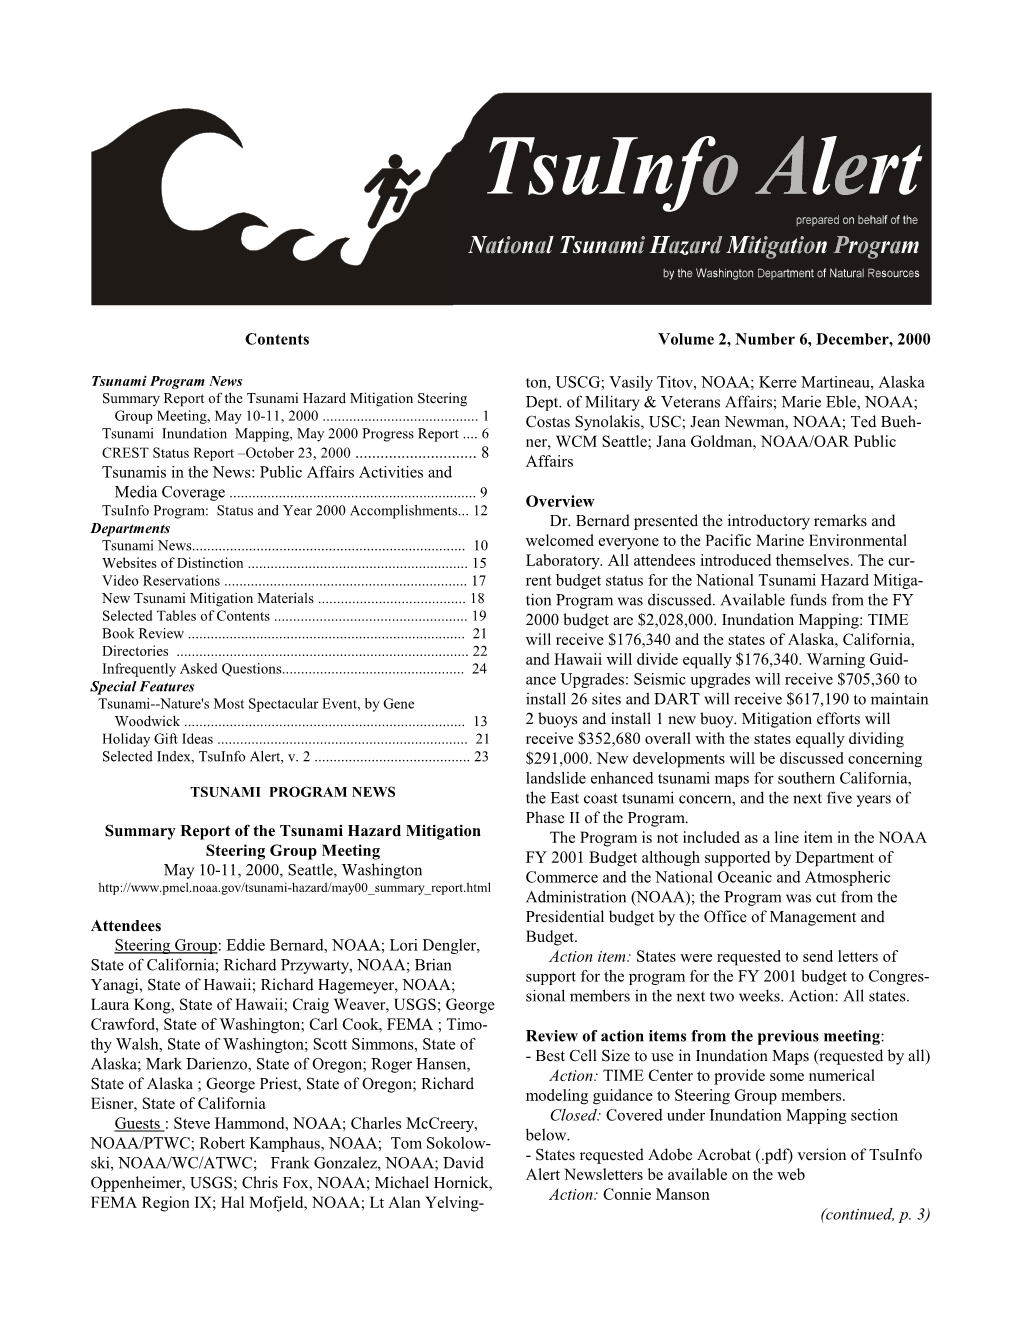 Contents Volume 2, Number 6, December, 2000 Tsunamis in The